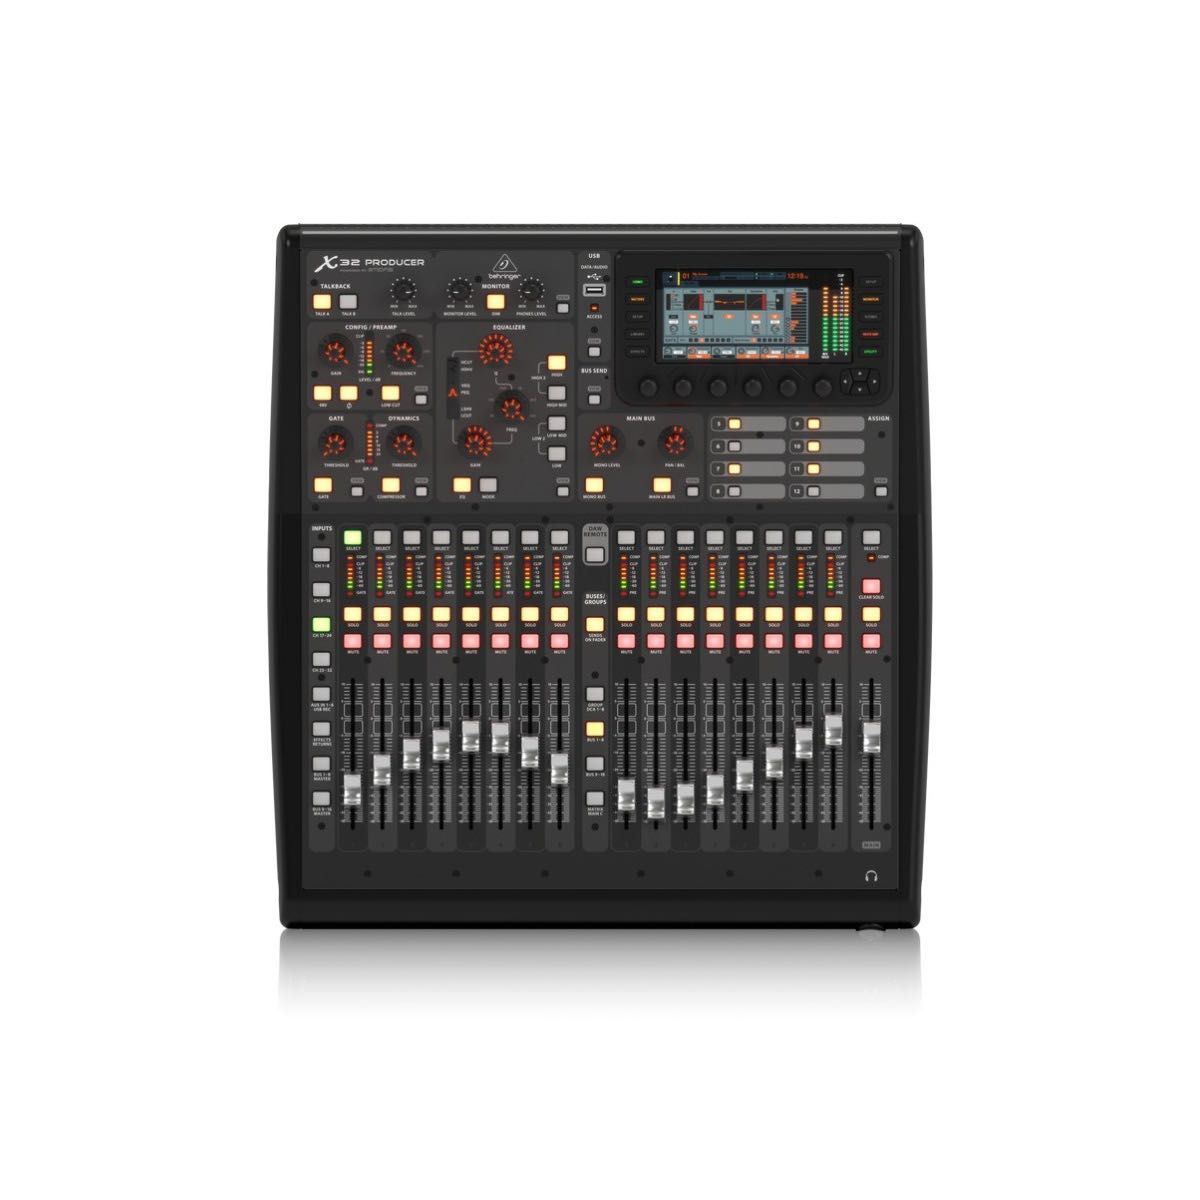 BEHRINGER X32 PRODUCER mikser cyfrowy